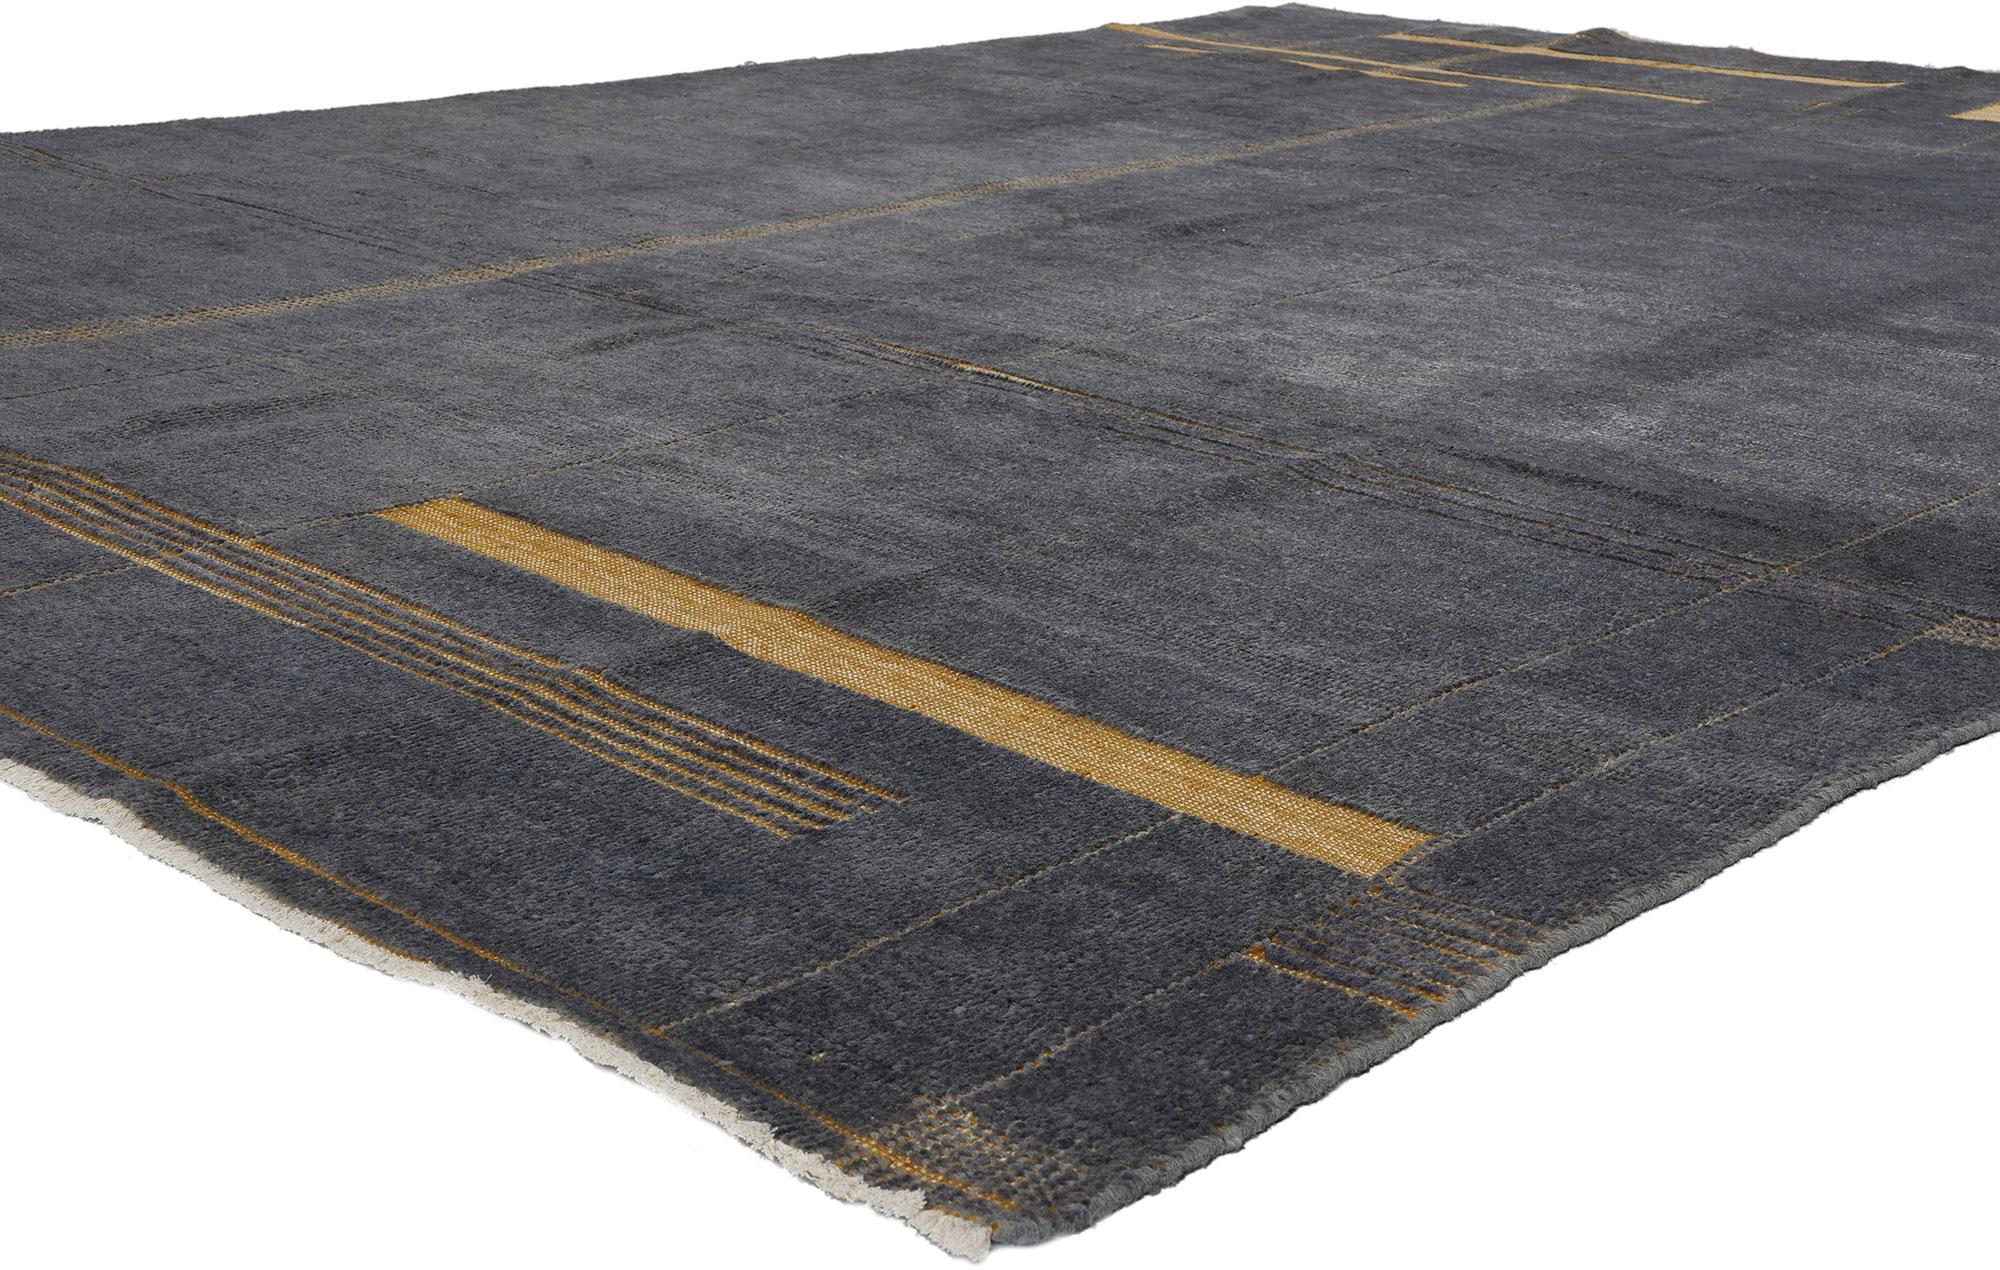 Modern Brutalist Moroccan Rug, Minimalist Brutalism Meets Organic Modern In New Condition For Sale In Dallas, TX